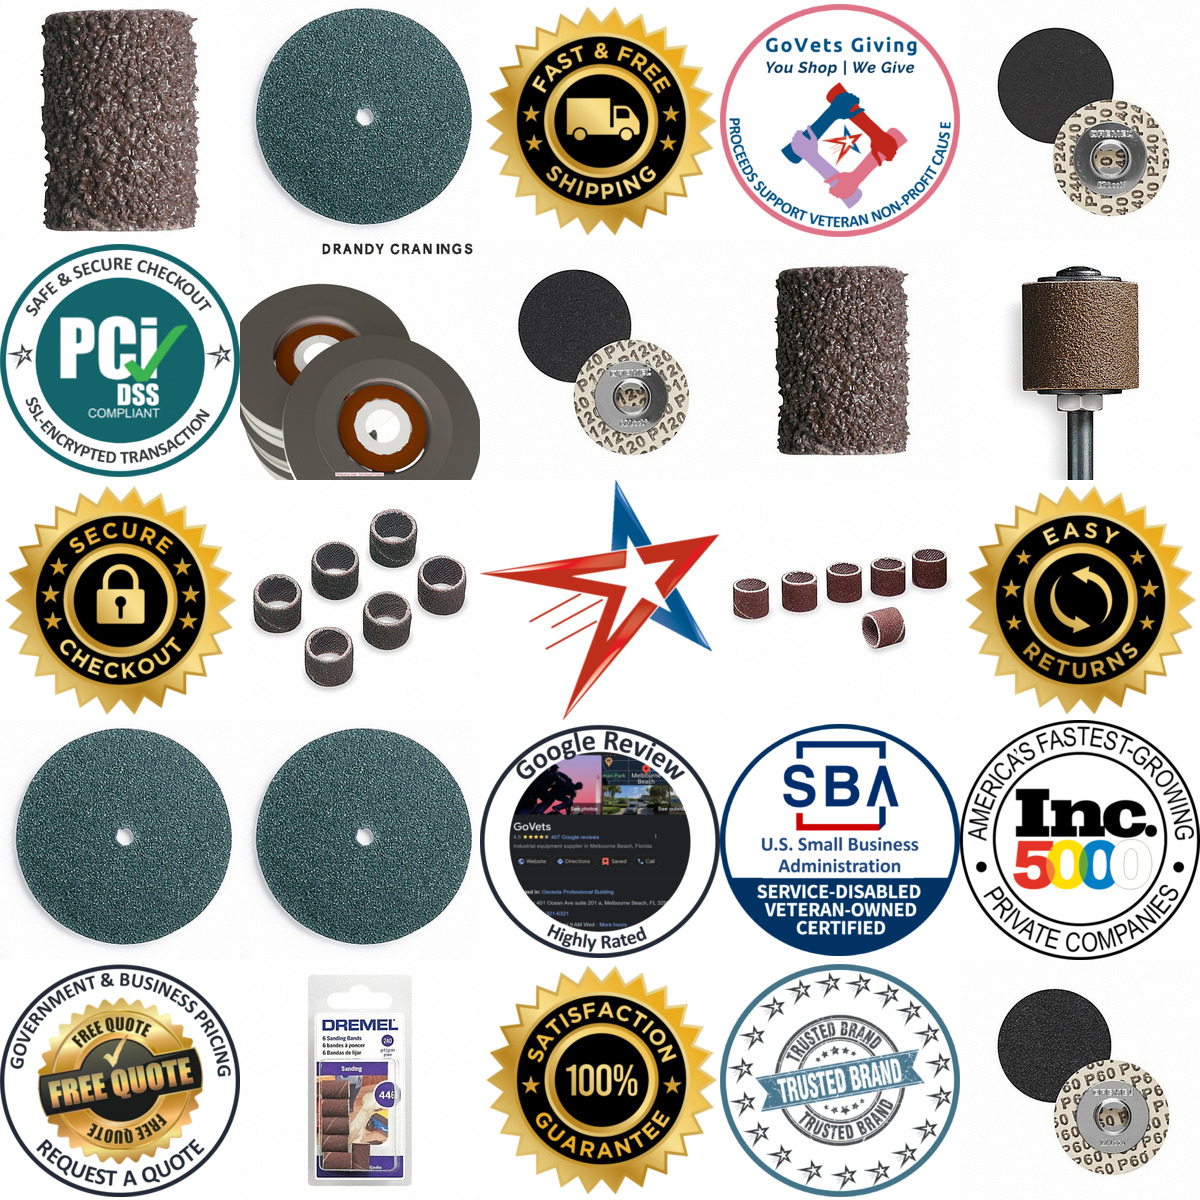 A selection of Sanding Discs and Drums For Rotary Tools products on GoVets